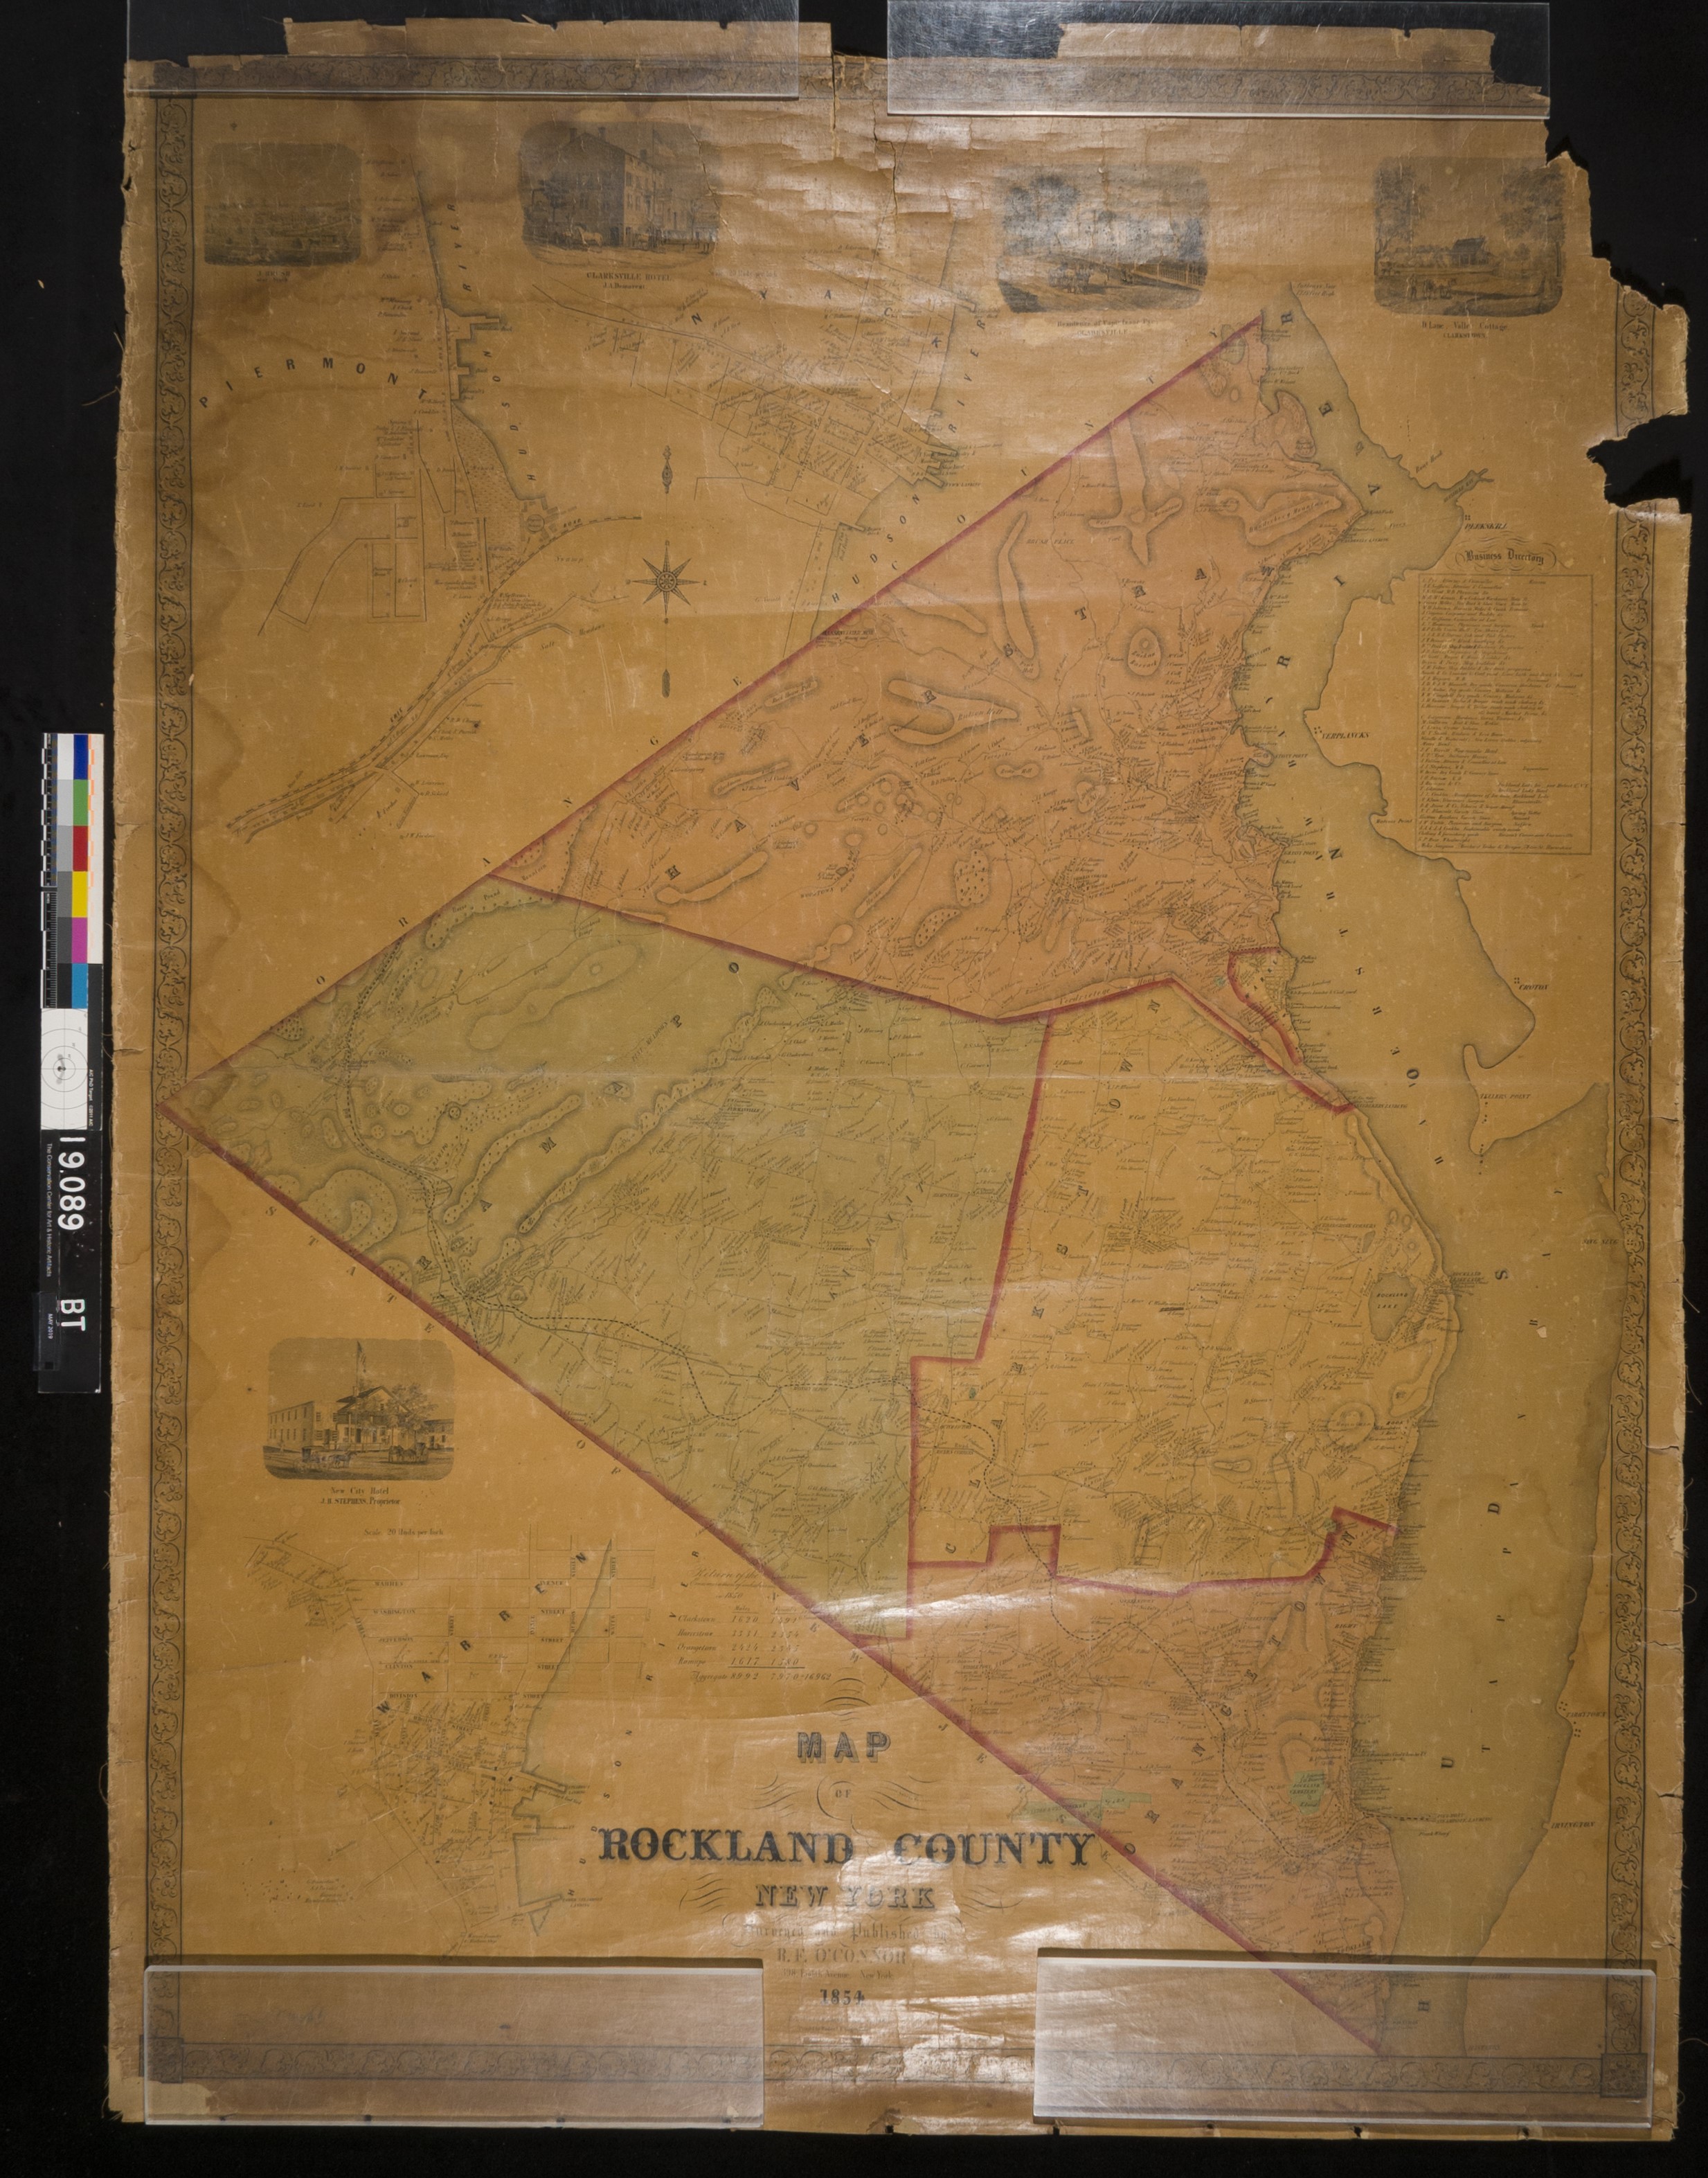 1854 Map of Rockland County, NY, before treatment